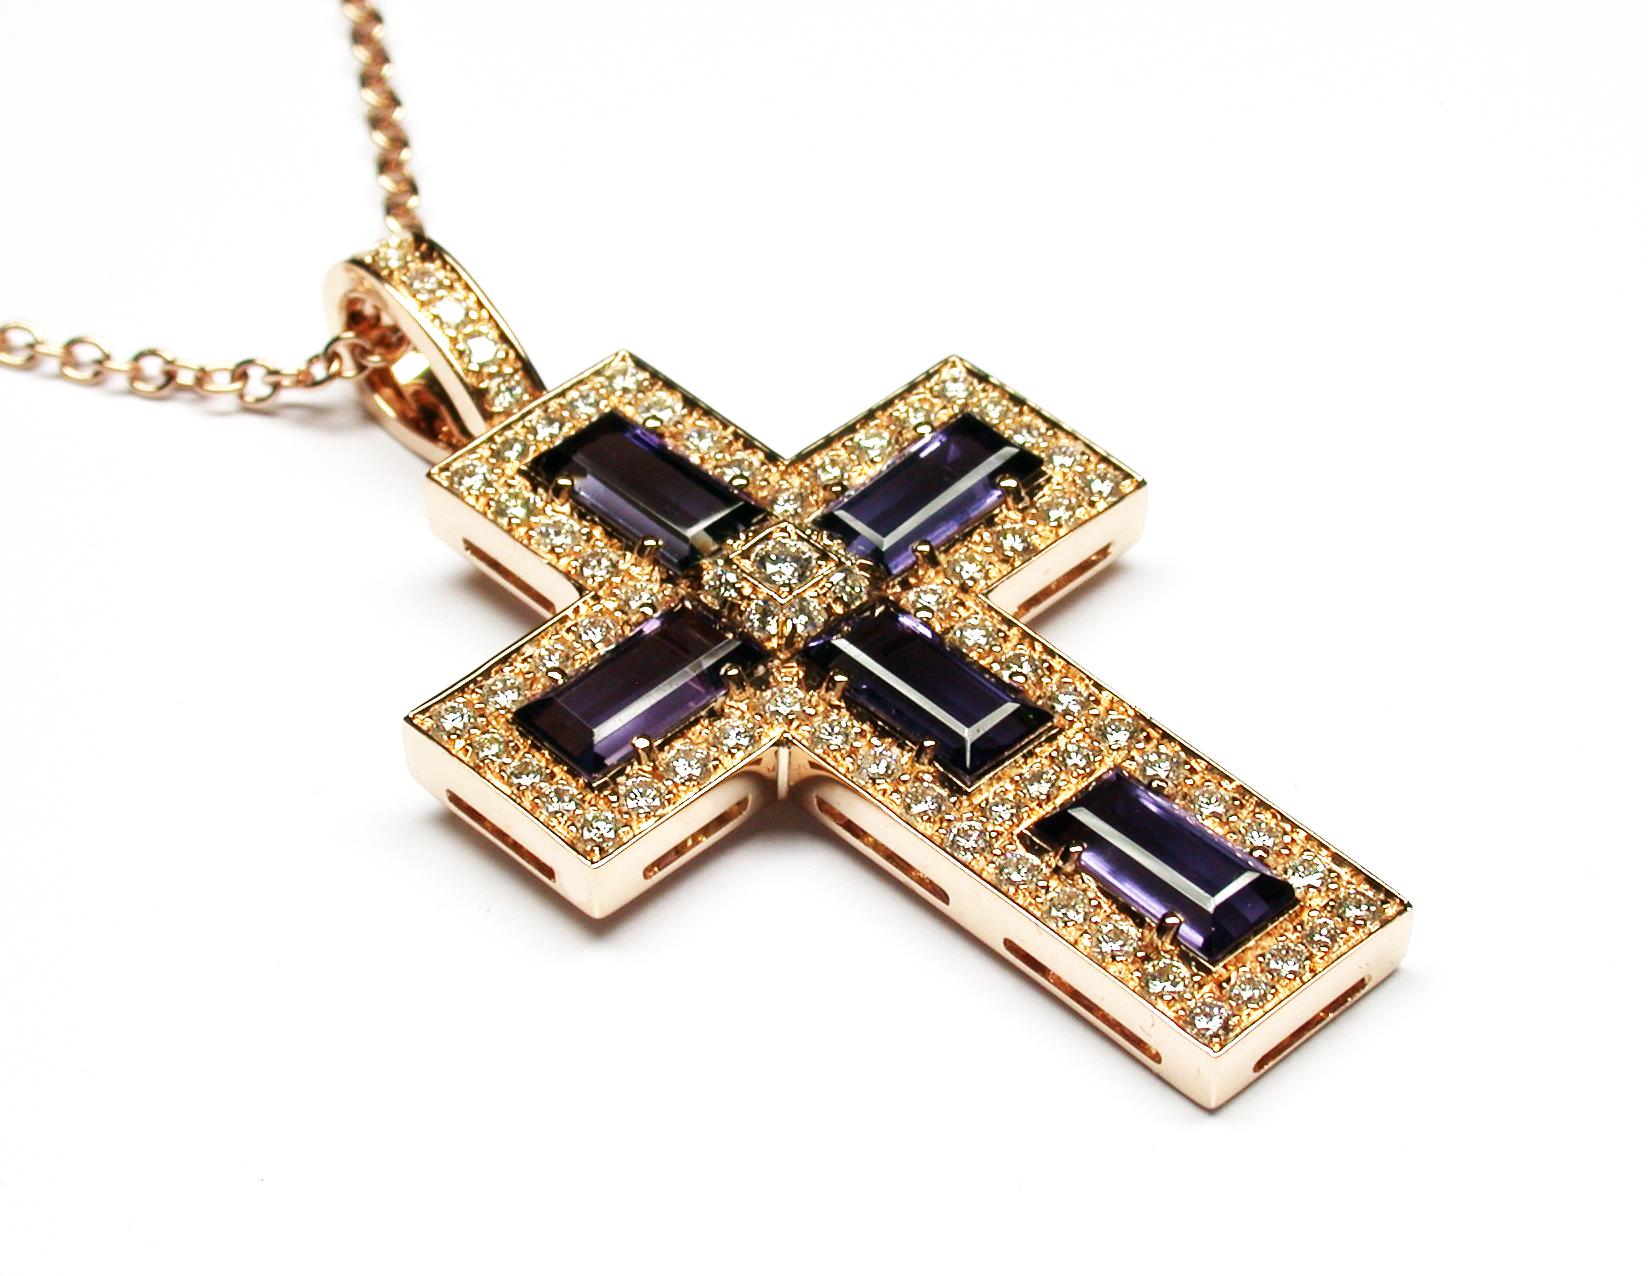 18k gold cross pendant made in italy